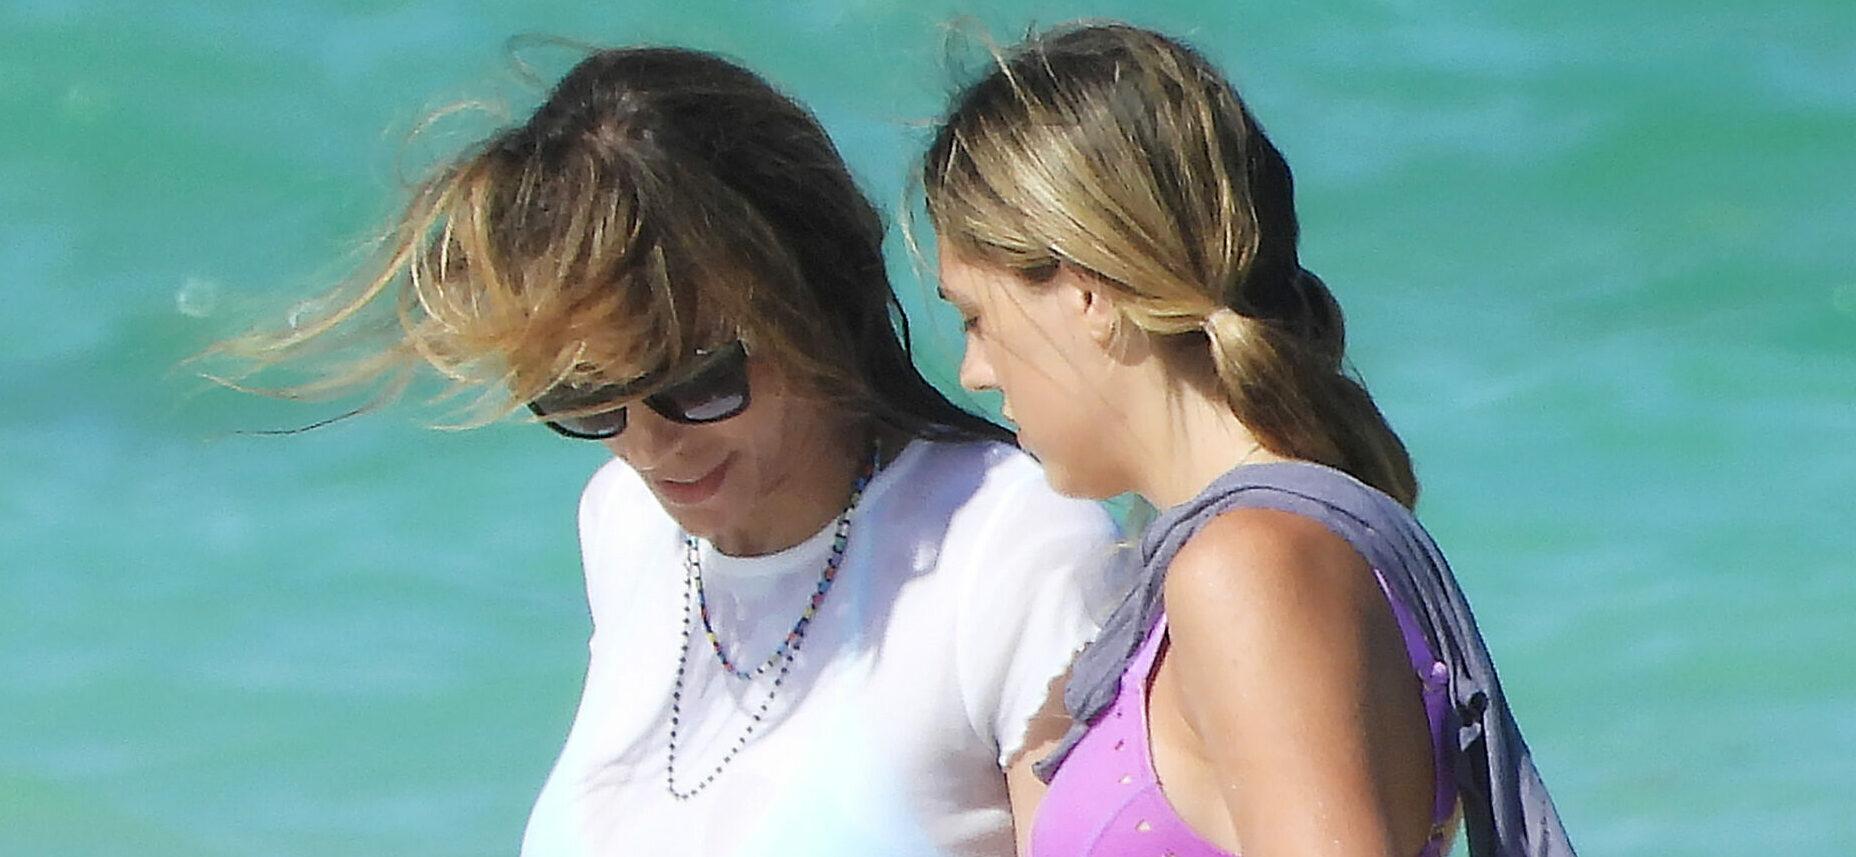 Sylvester Stallone apos s wife and daughter enjoy a girls apos trip in the popular tourist destination Tulum Mexico